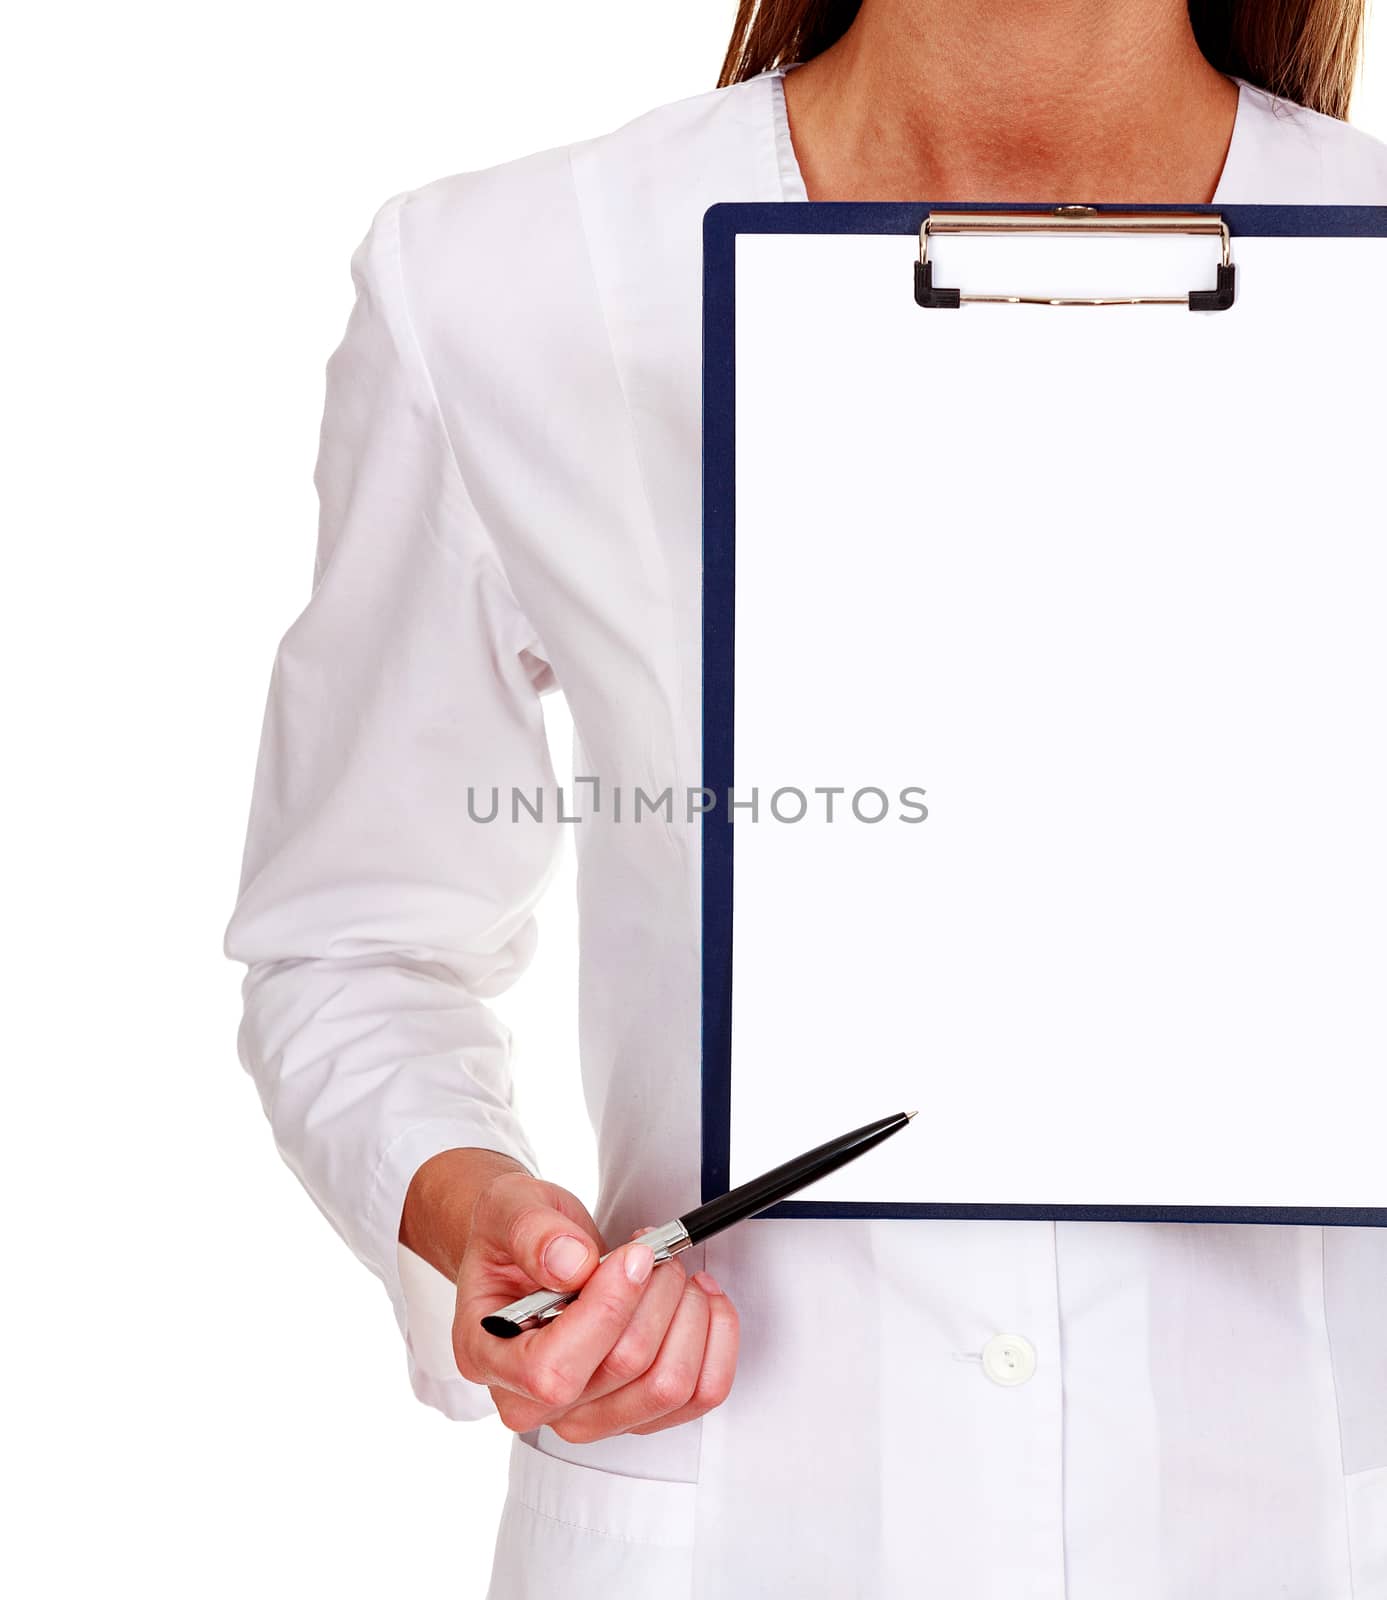 Closeup shot of woman doctor or nurse pointing to a blank copyspace using a pen on the clipboard, isolated on white background